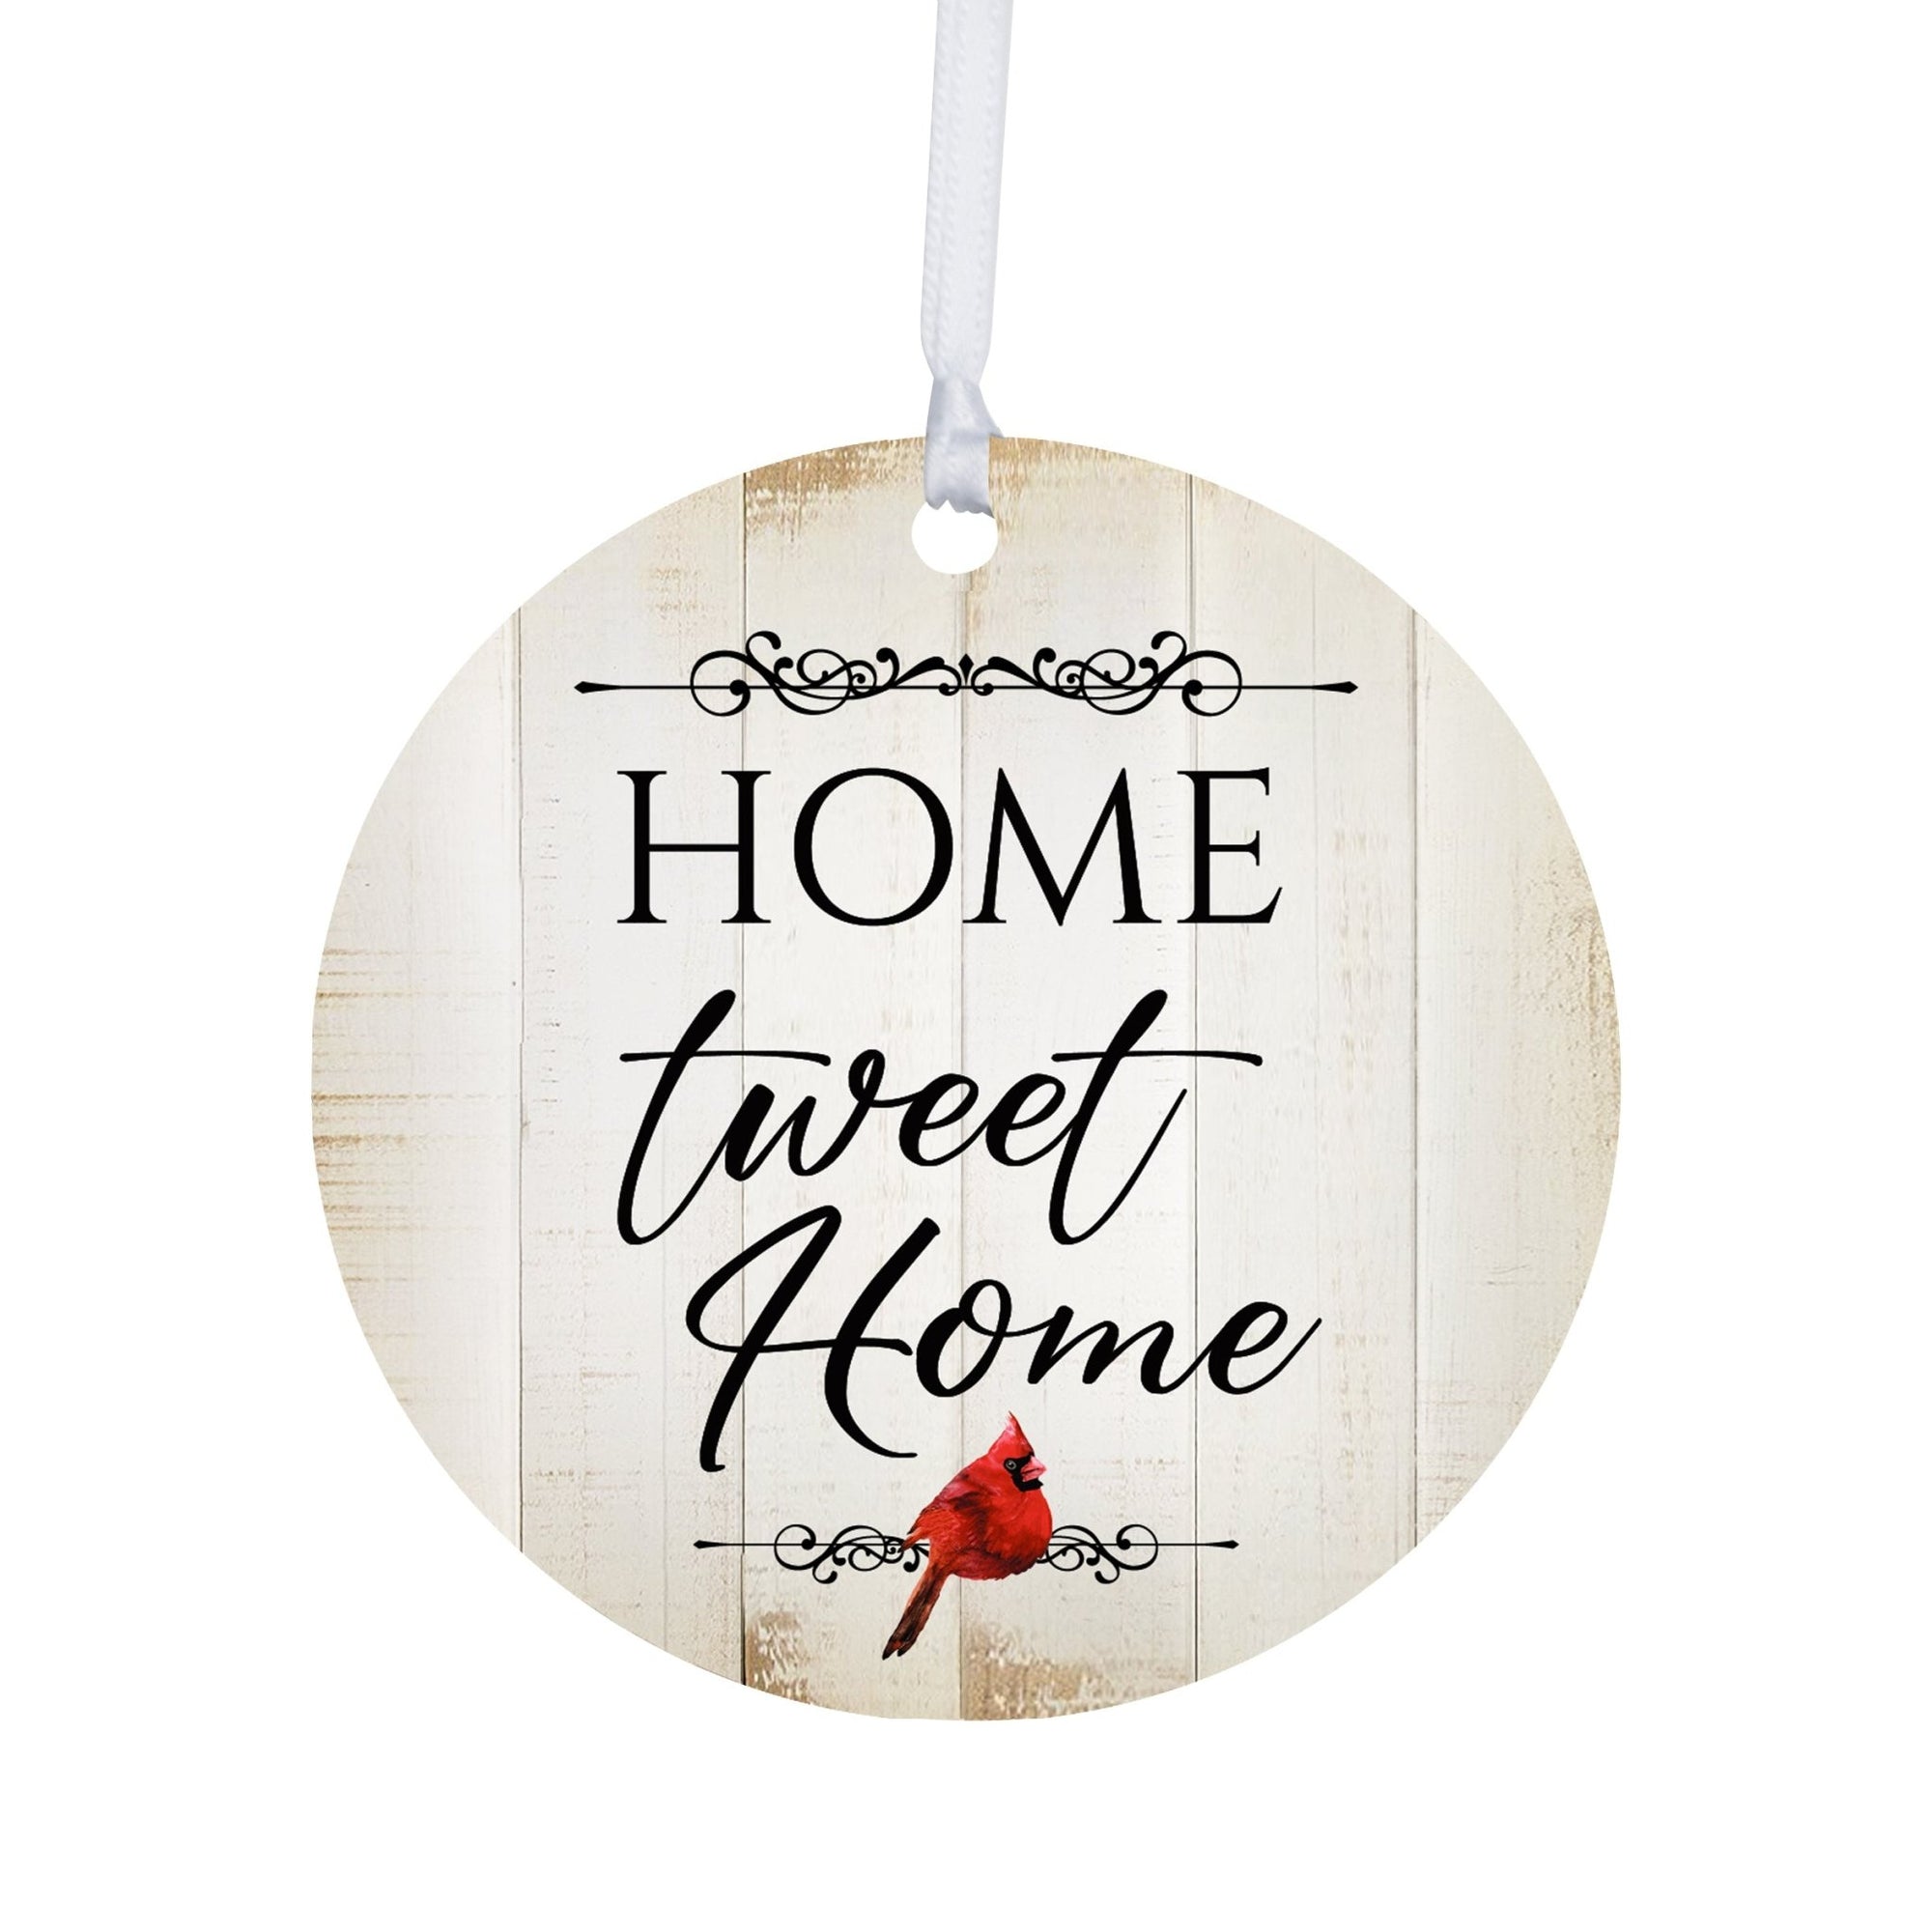 Vintage-Inspired Cardinal Ornament With Everyday Verses Gift Ideas - Home Tweet Home - LifeSong Milestones